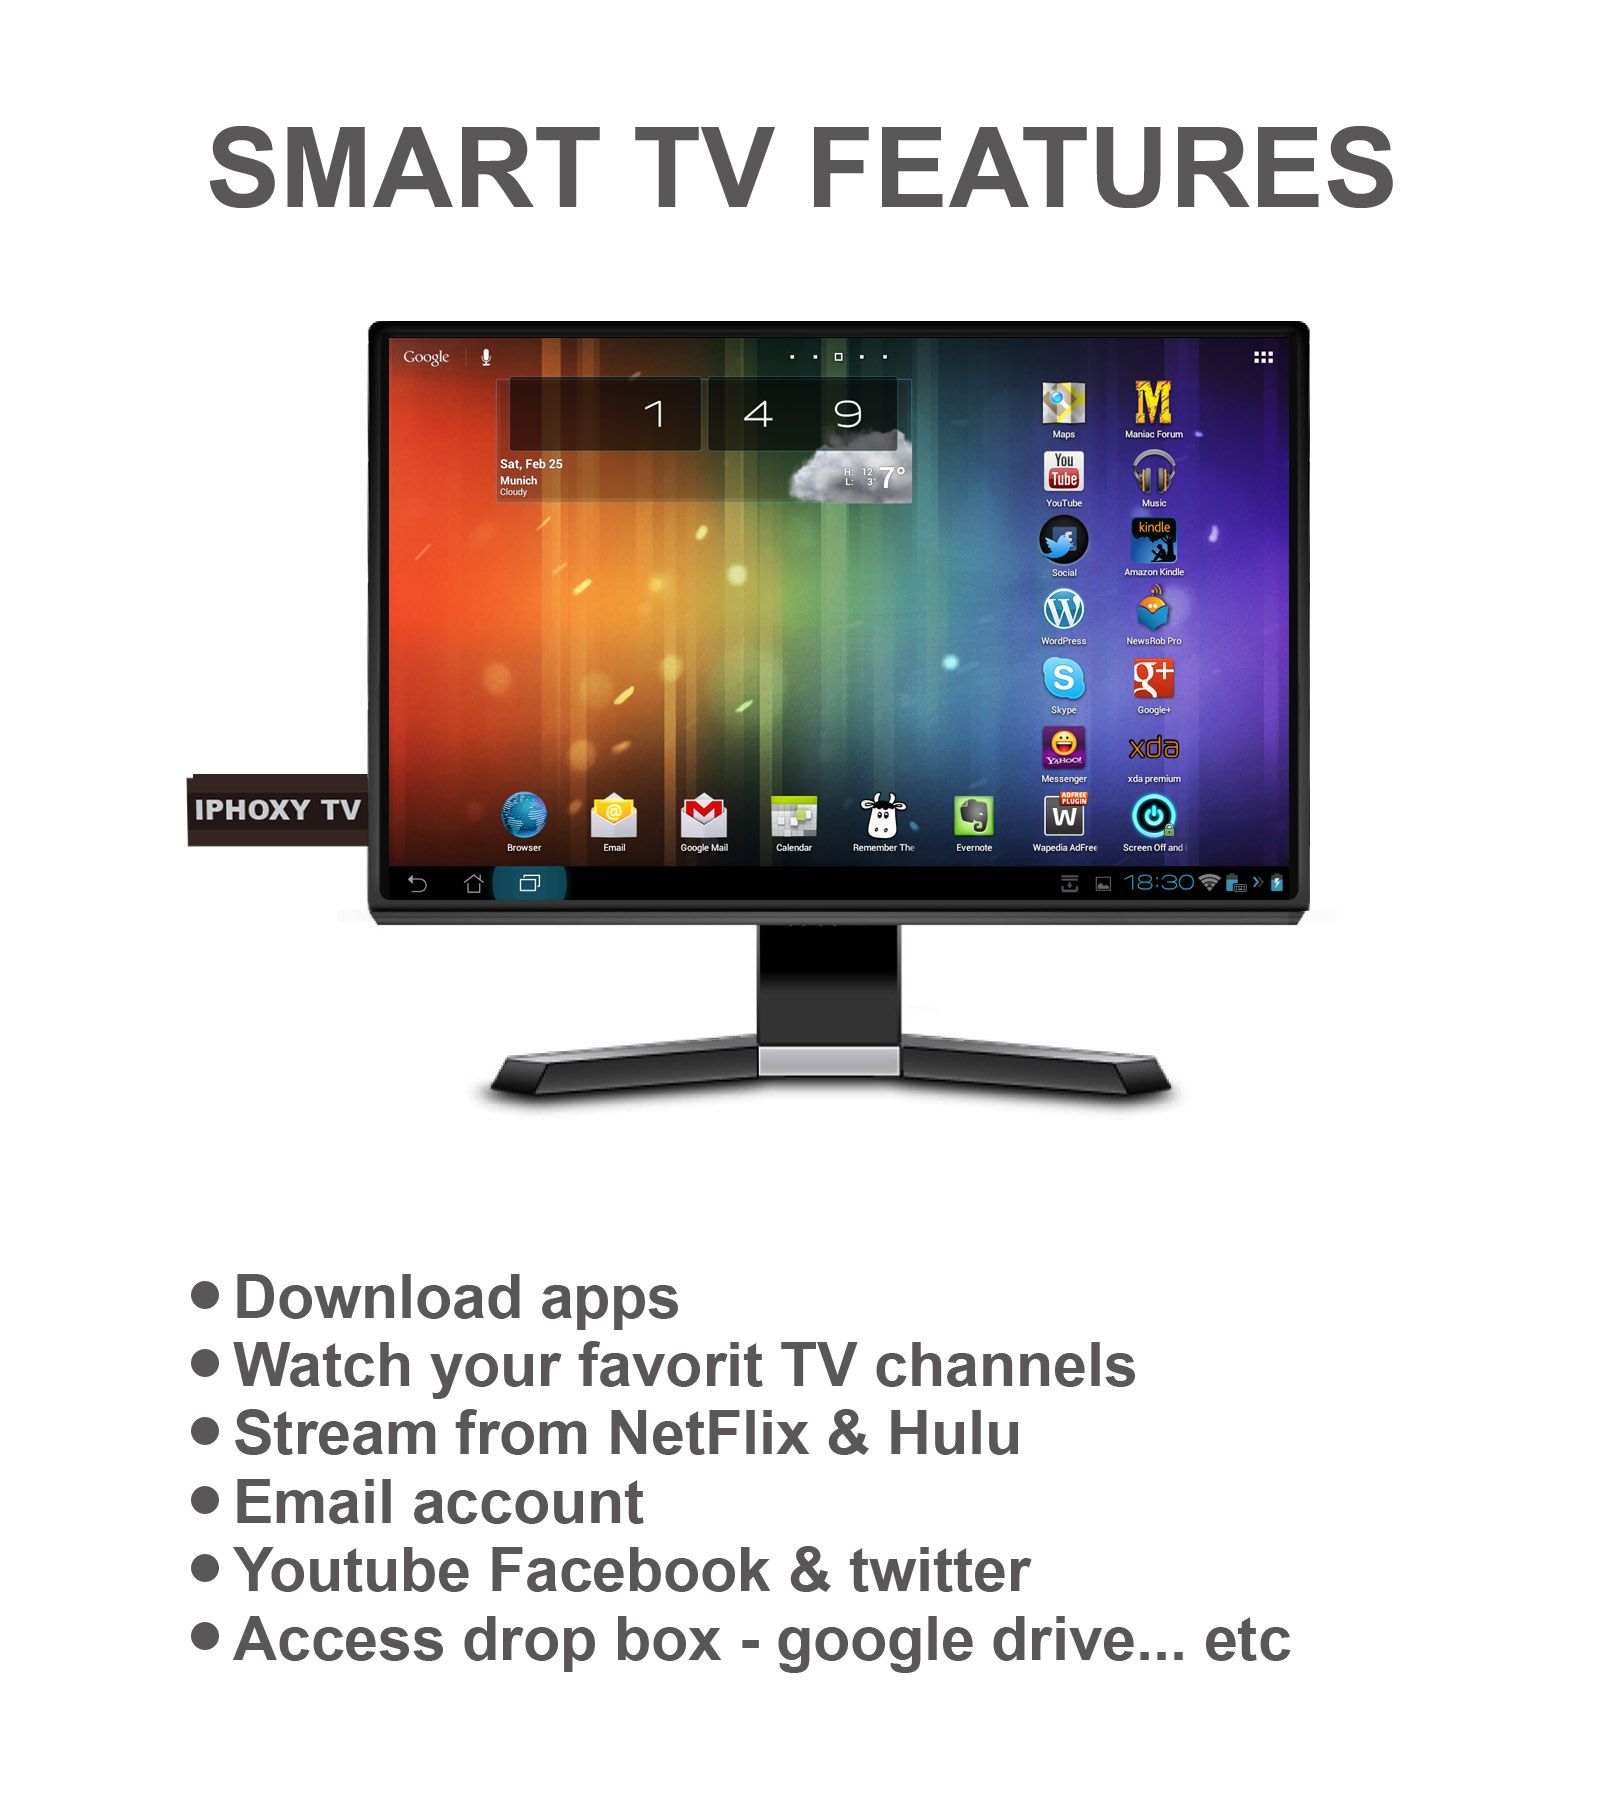 wirelessly connect your phone tablet PC to your TV